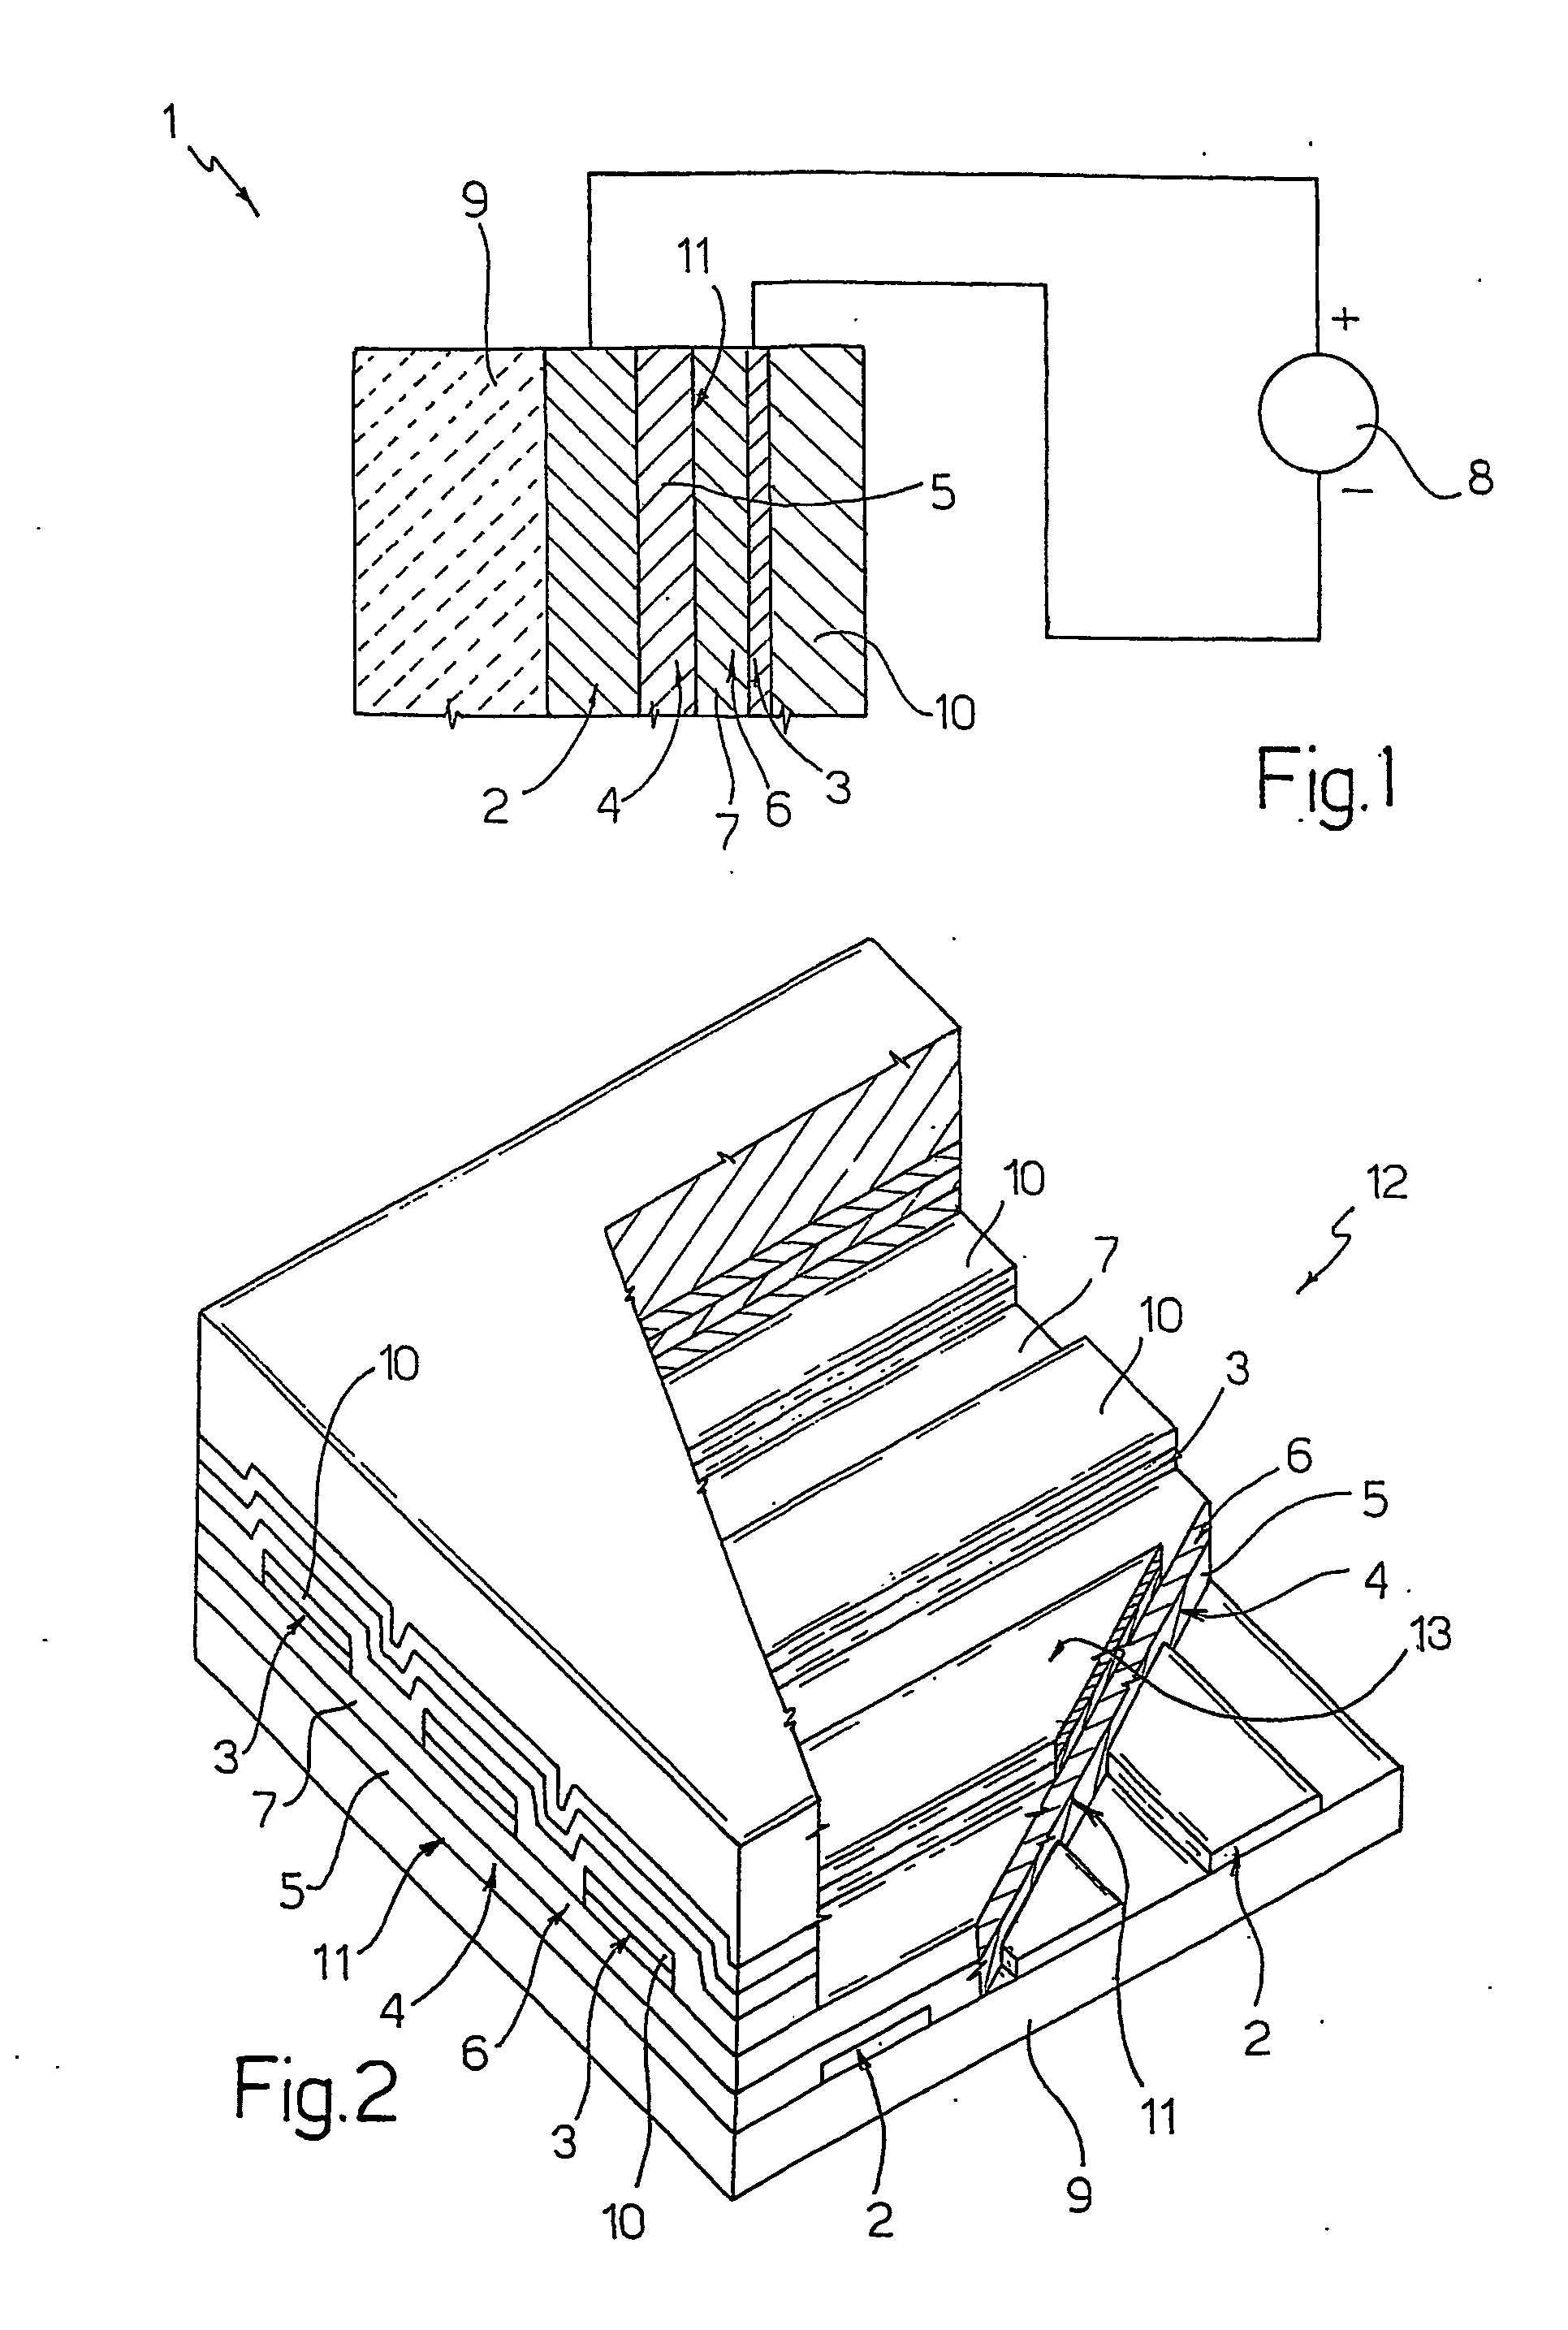 Organic electroluminescent device based upon emission of exciplexes or electroplexes, and a method for its fabrication